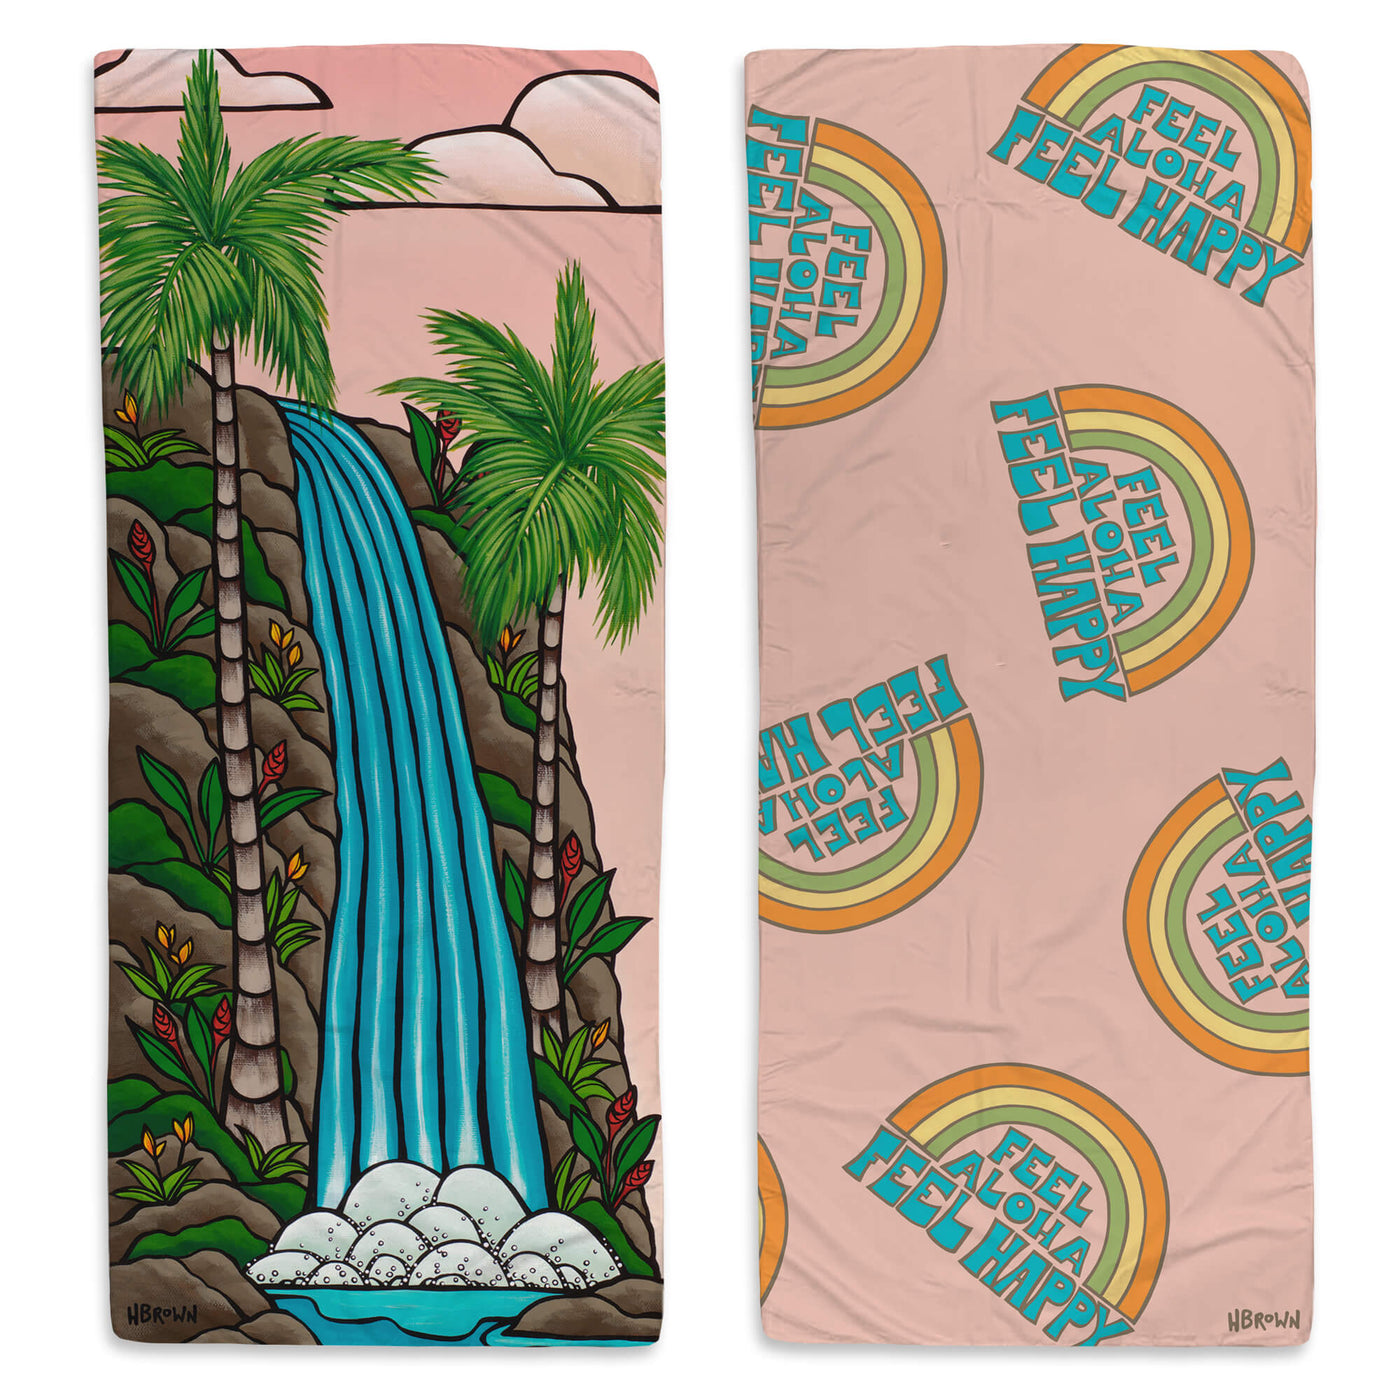 a microfiber towel featuring a waterfall surrounded by colorful flowers and coconut trees by Hawaii surf artist Heather Brown